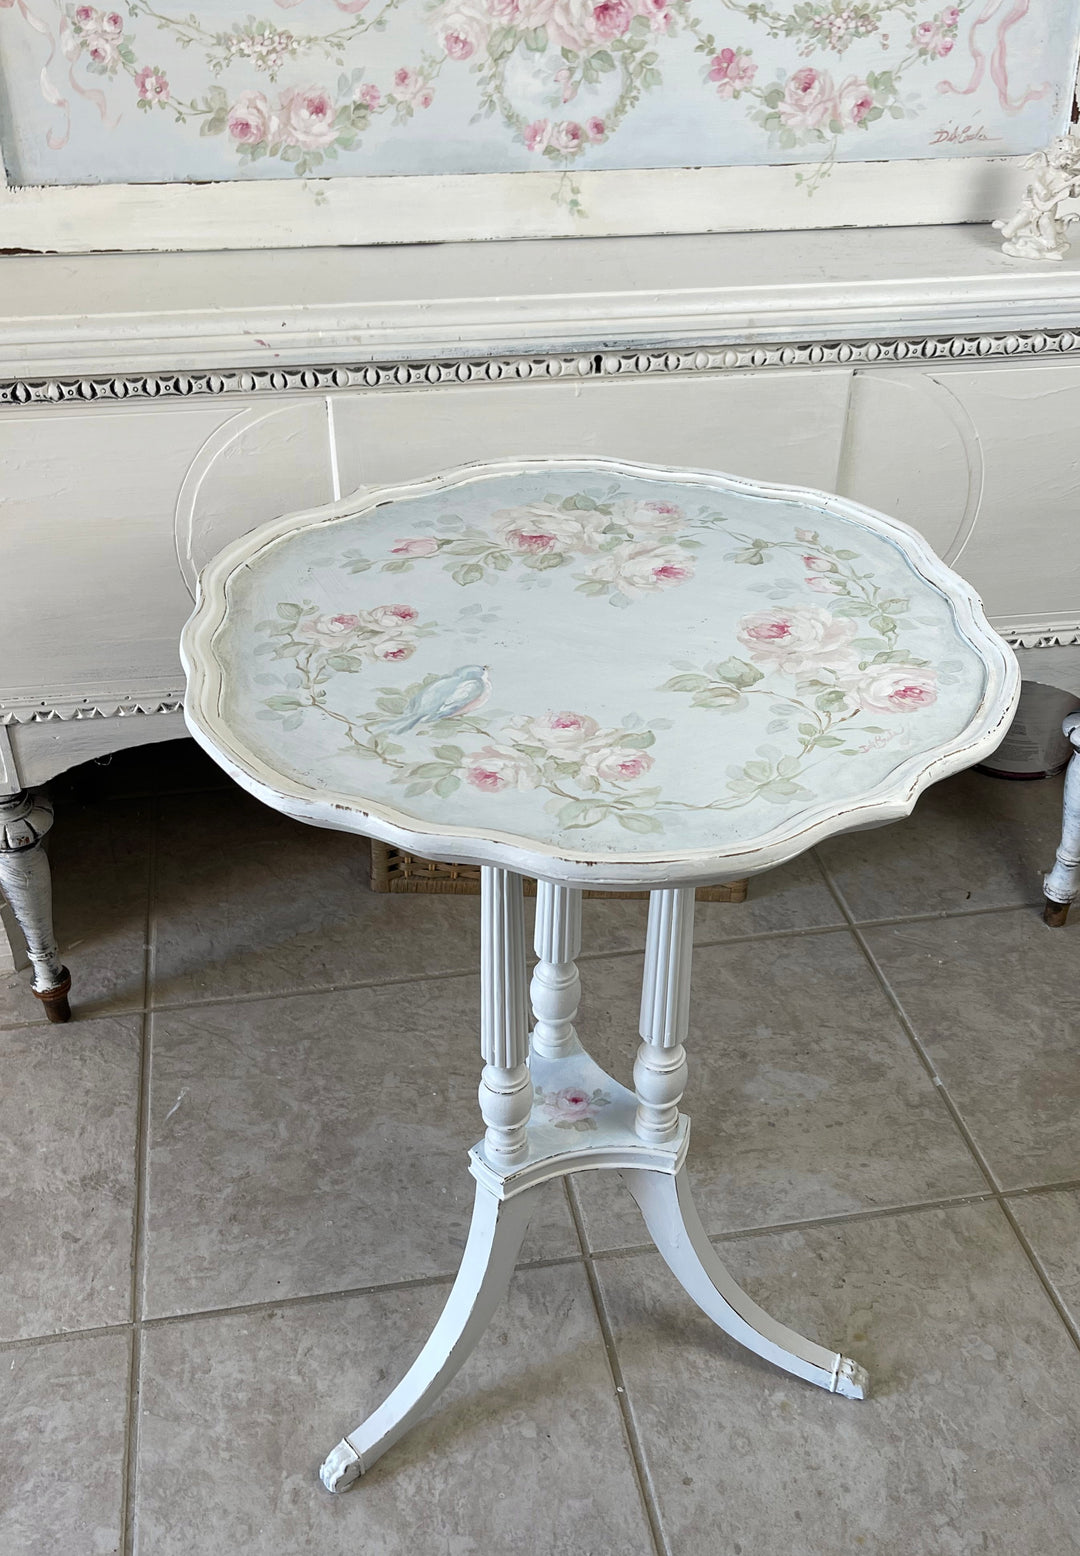 Shabby Chic Antique Bluebird and Roses Table Romantic Cottage by Debi Coules